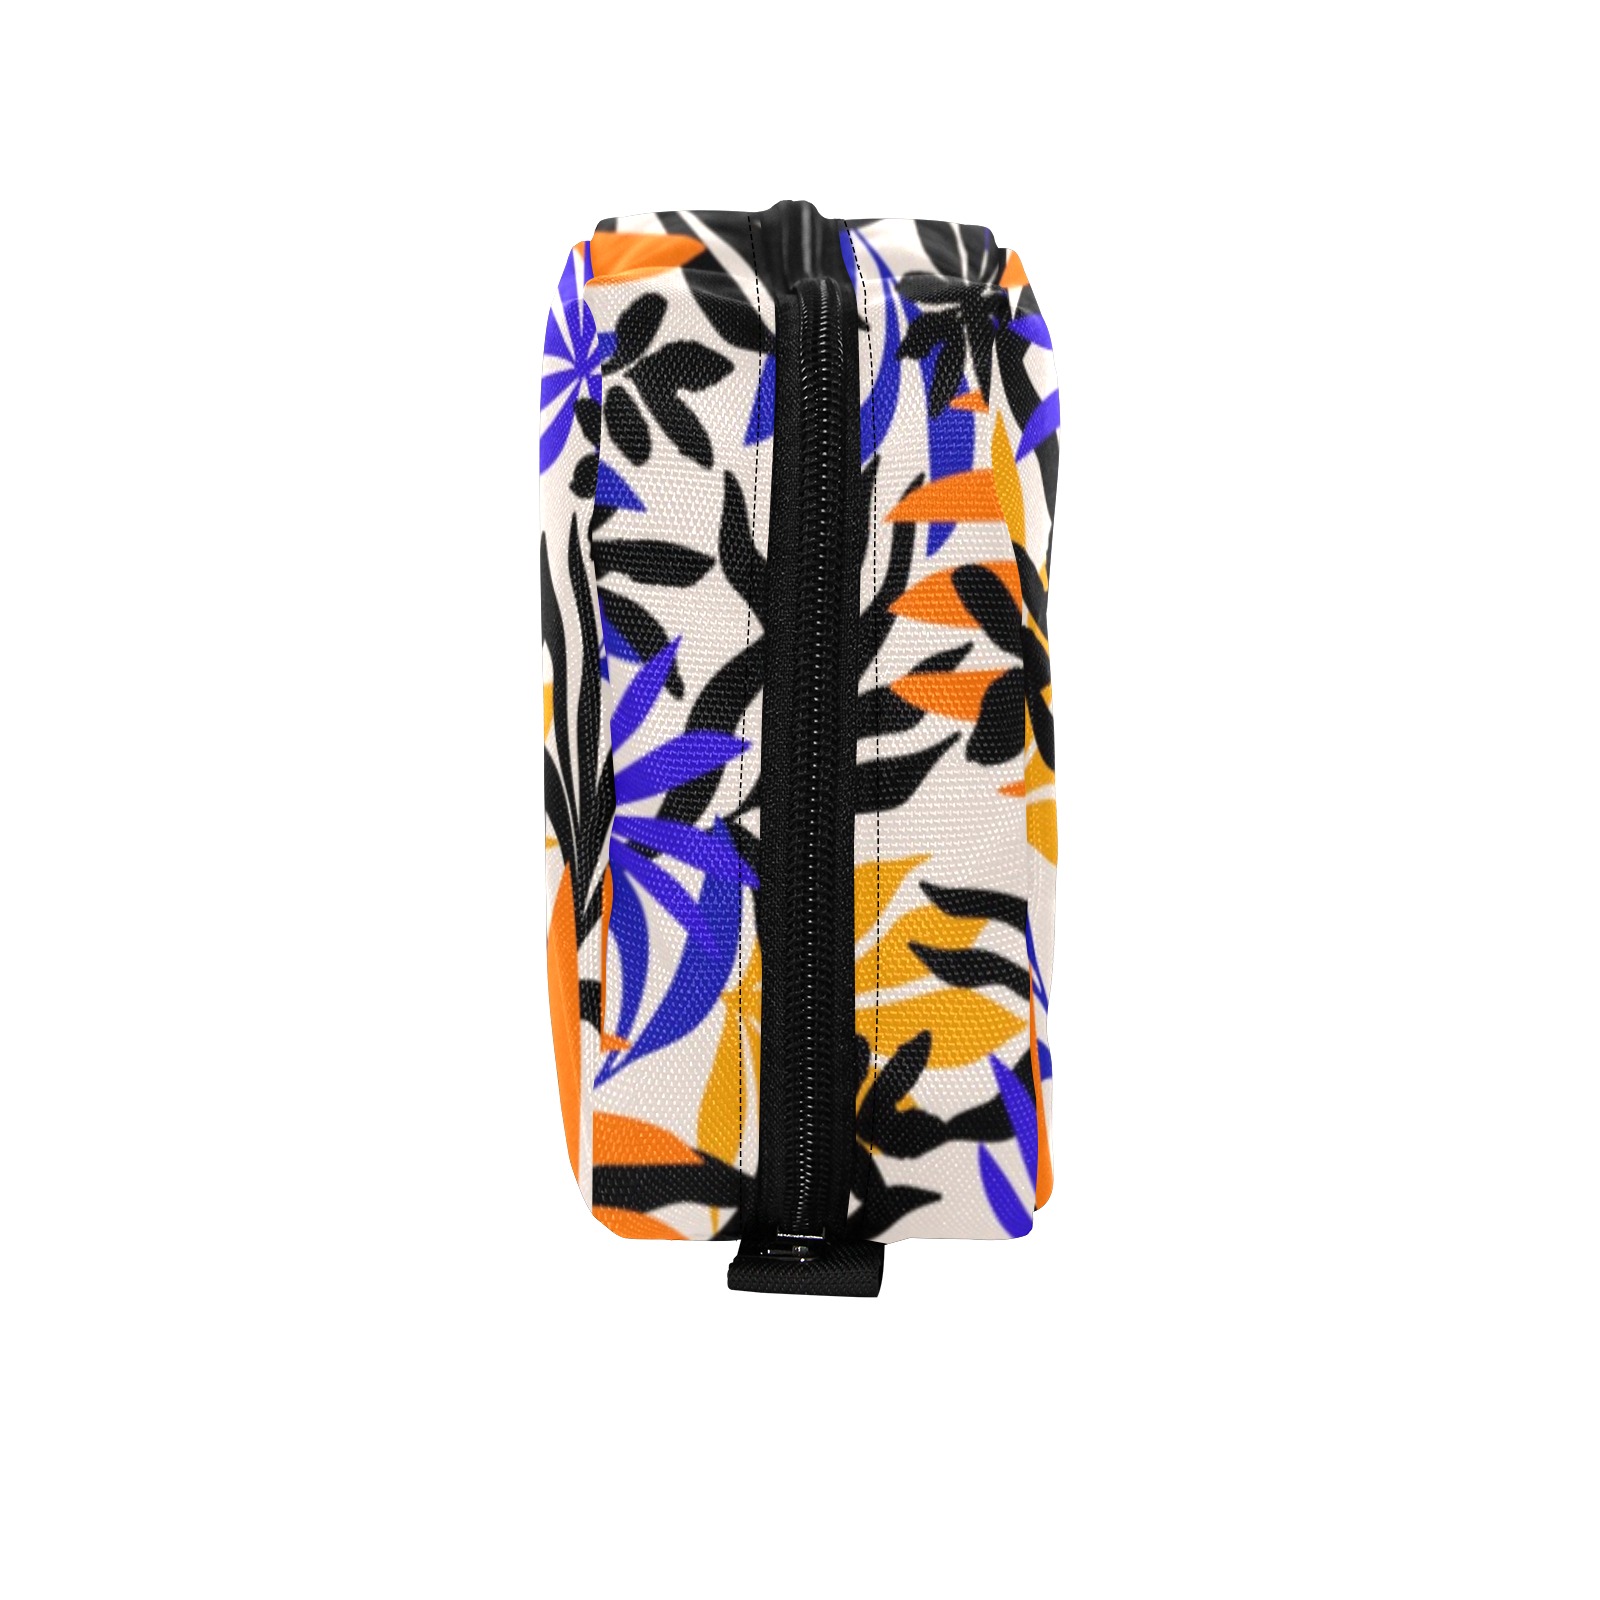 Tropical color ASF 01 Toiletry Bag with Hanging Hook (Model 1728)